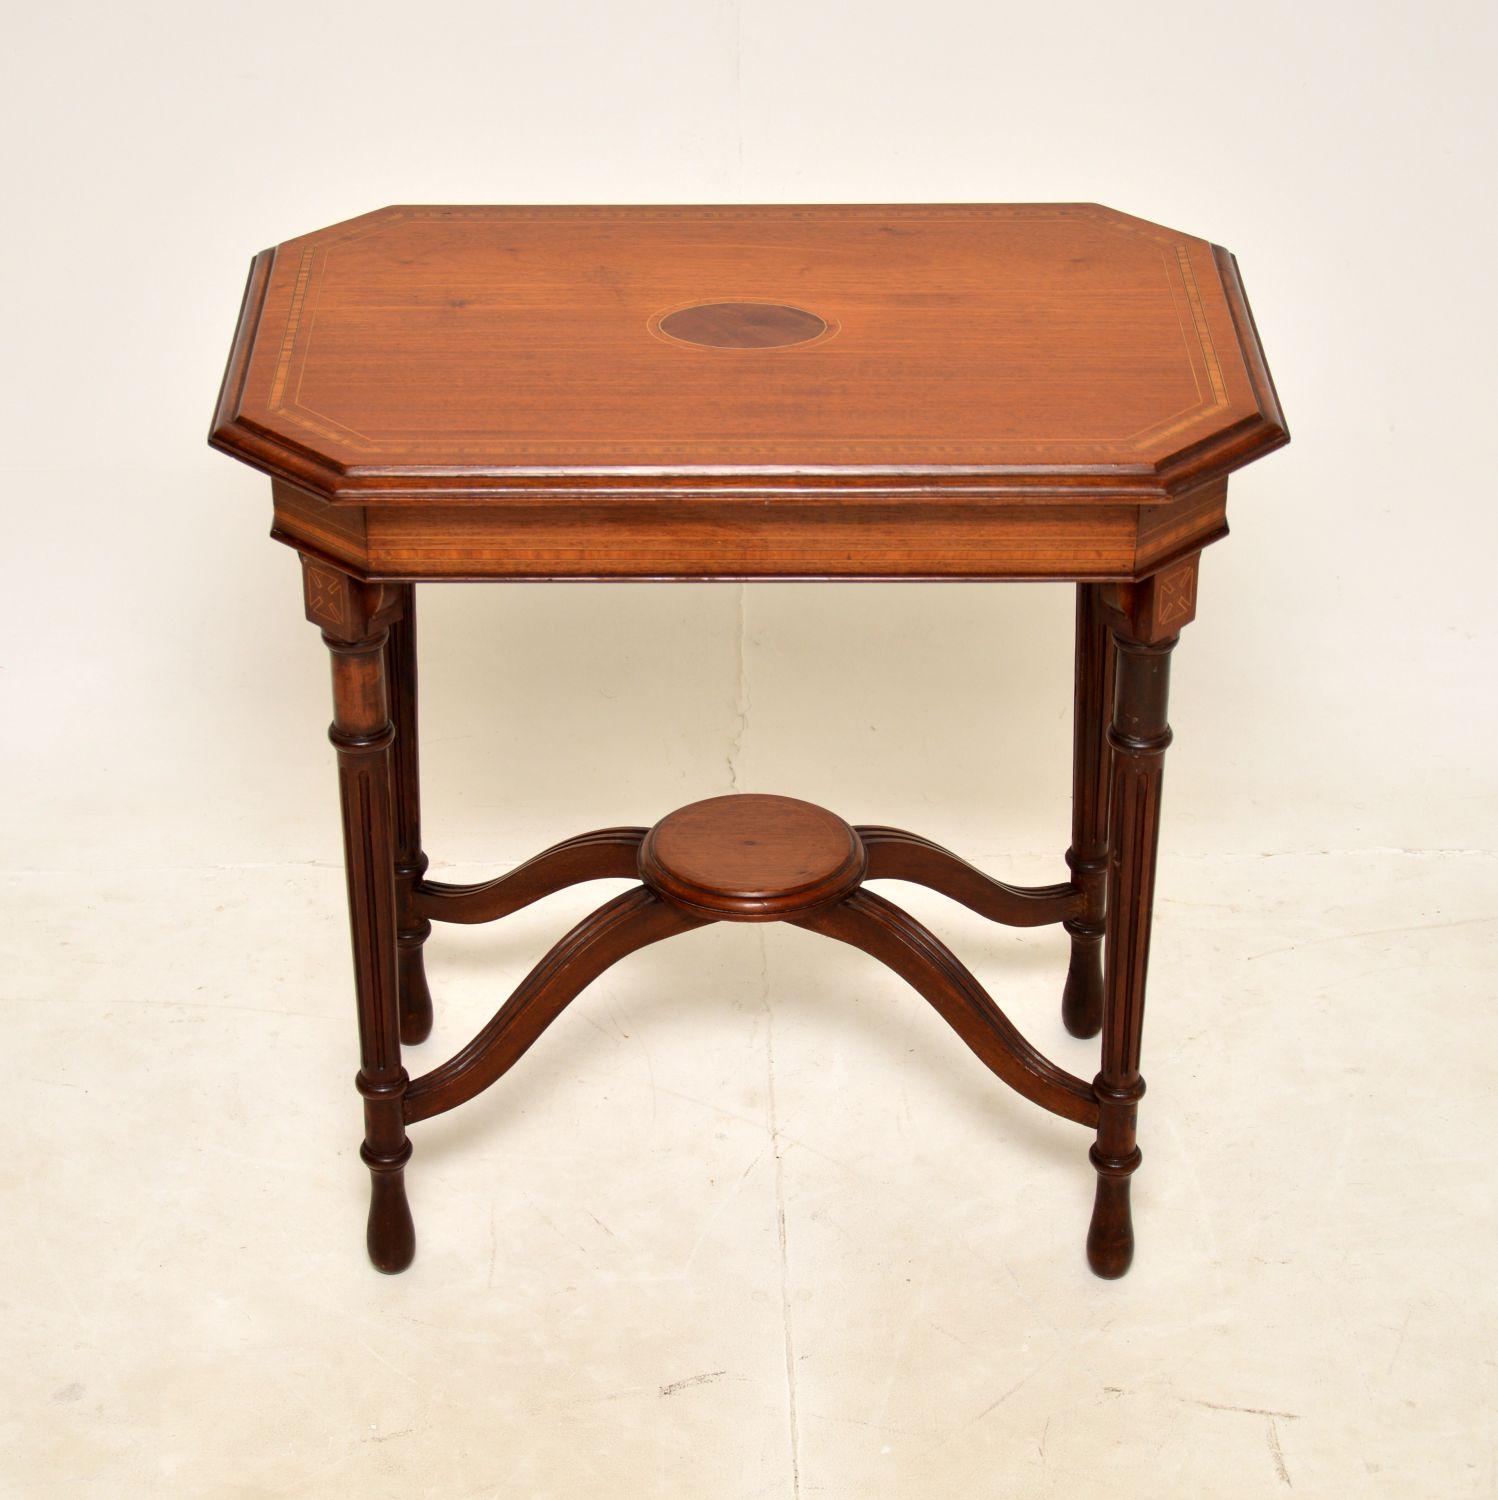 A lovely antique Victorian period occasional side table. This was made in England, it dates from around the 1880-90s period.

This is of excellent quality, with wonderful inlays of walnut and satinwood. The legs are fluted and have a lovely